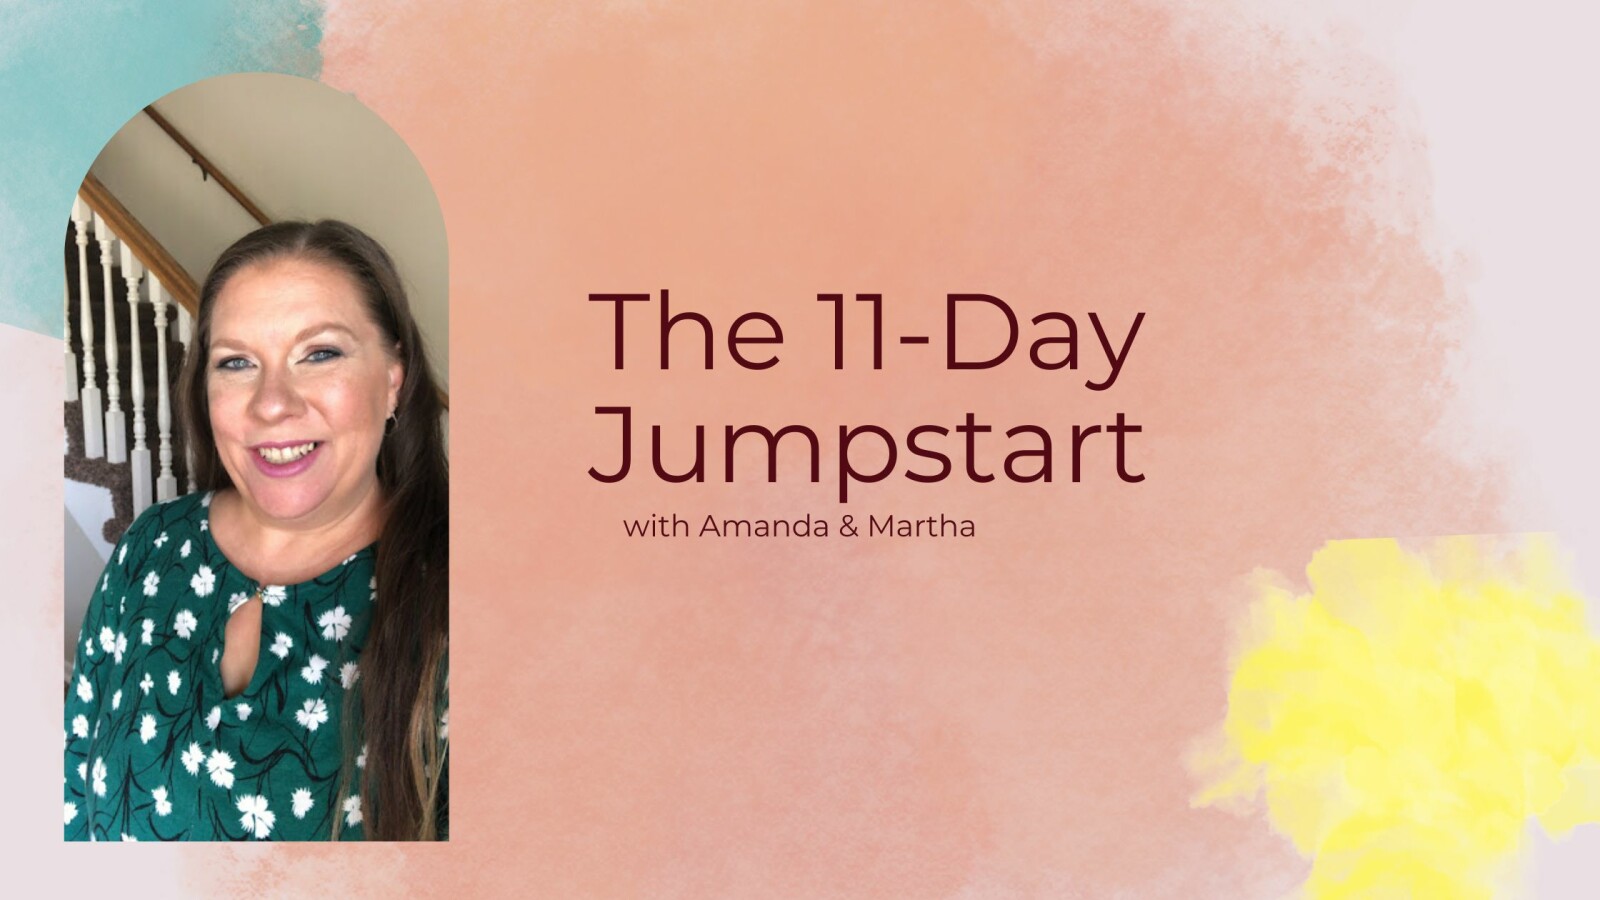 What is the 11-Day Jumpstart?